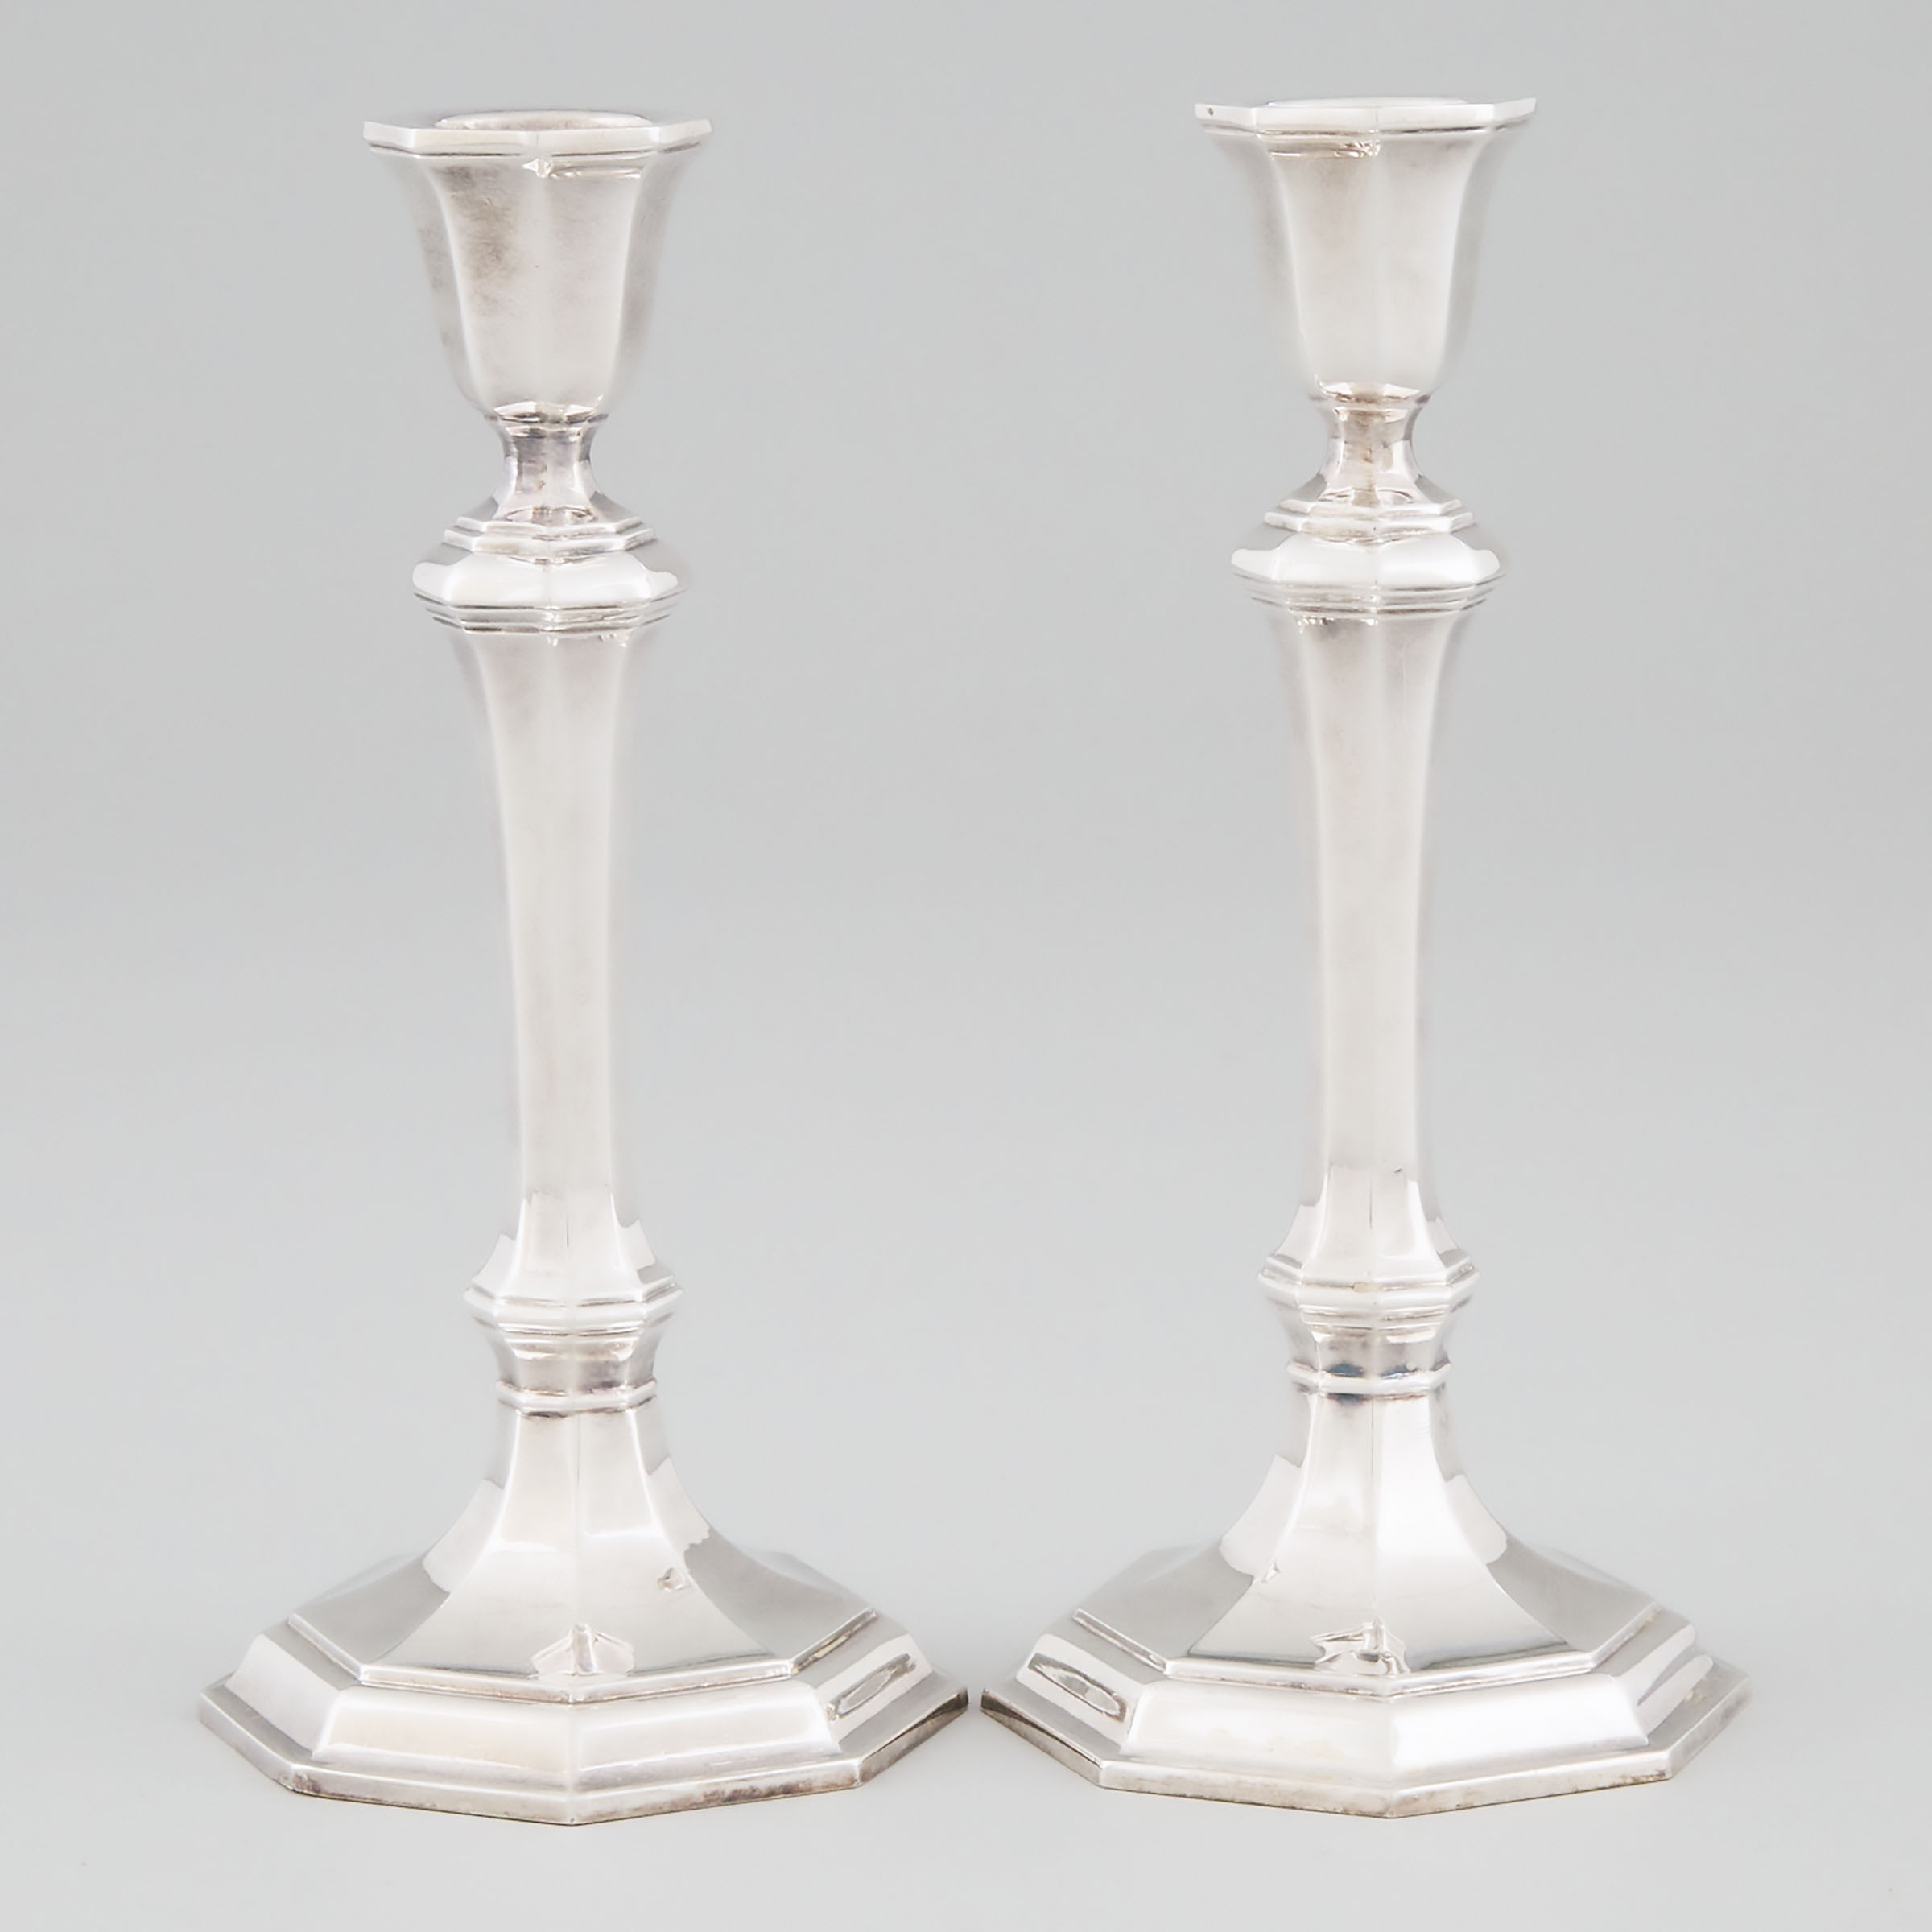 Pair of German Silver Octagonal Table Candlesticks, for Tiffany & Co., New York, 20th century